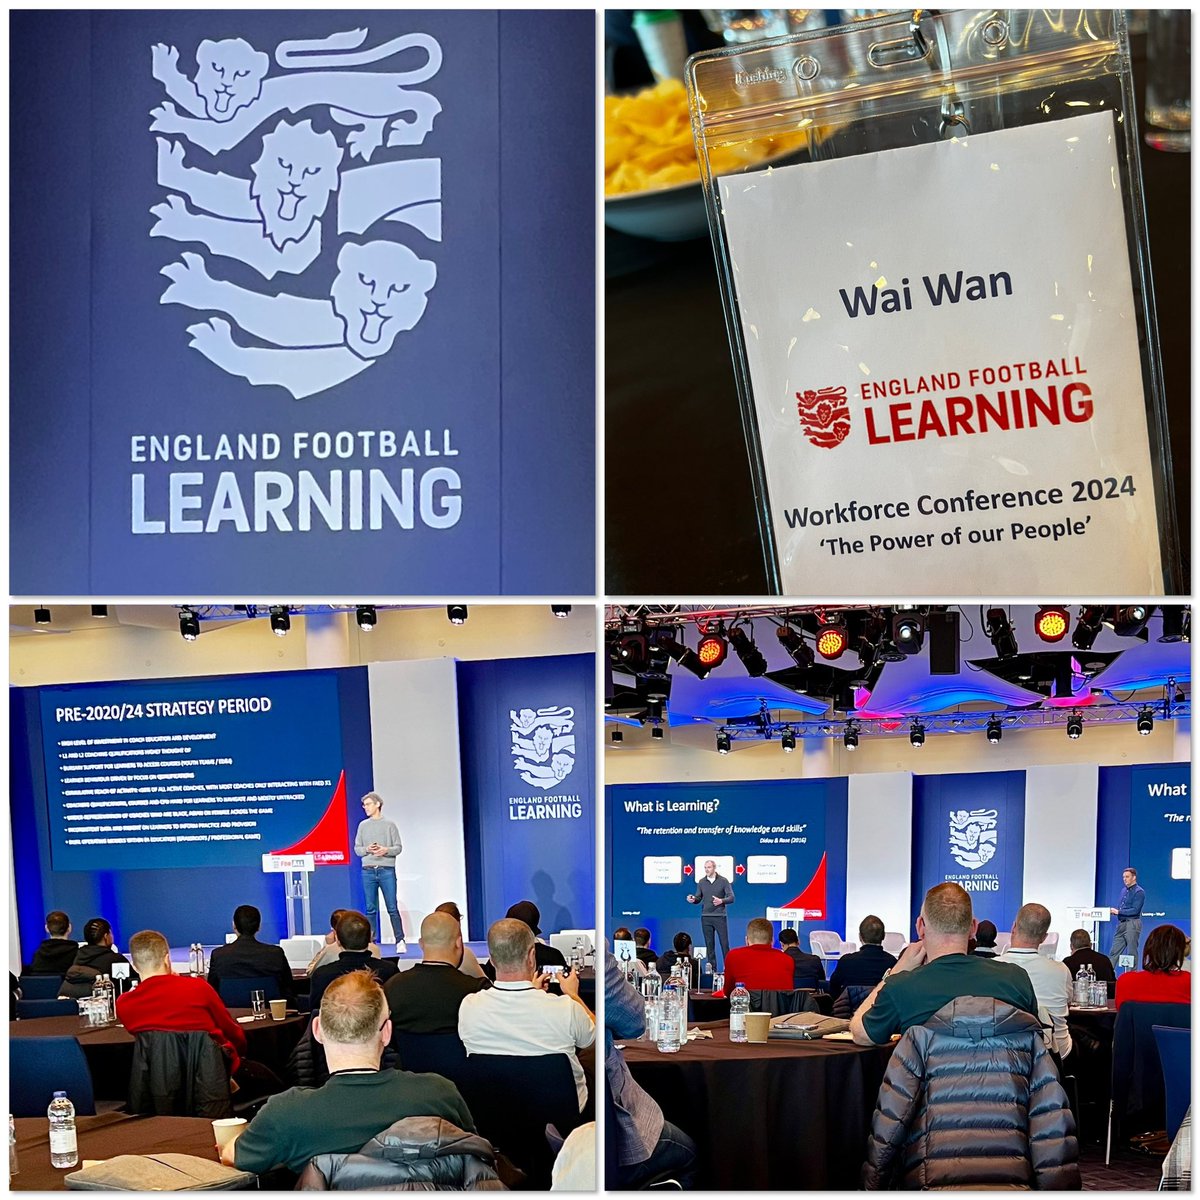 Was great to connect, collaborate and gain insights with a variety of people at the Workforce Conference at Wembley ⚽️ #alwayslearning #coachdevelopment